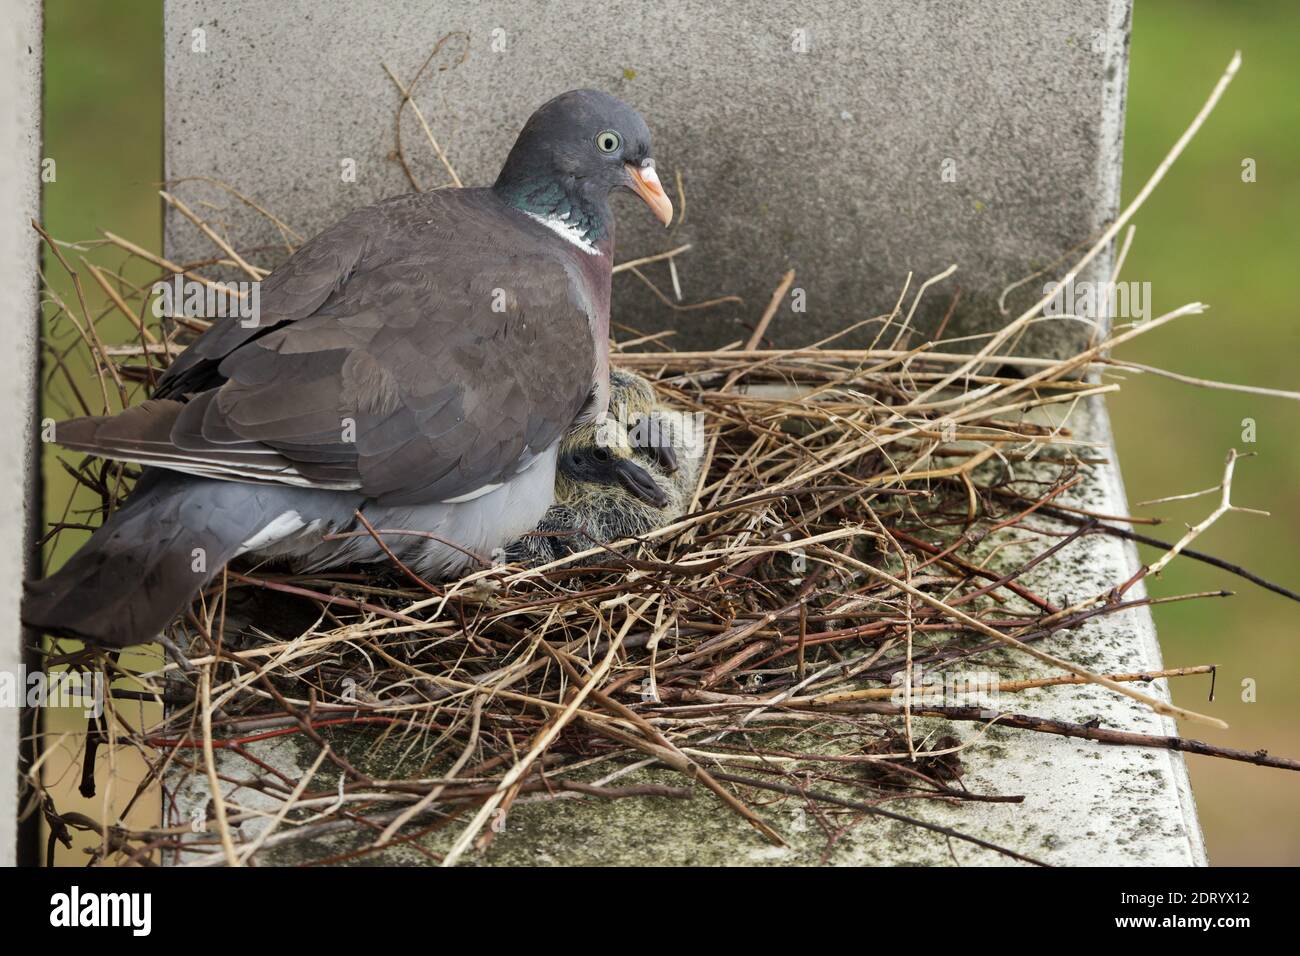 Common wood pigeon (Columba palumbus) tends to its two newly hatched squabs in the nest on the ledge of a dwelling house in Prague, Czech Republic. The nest is pictured approximately one week after the squabs hatched out. Stock Photo